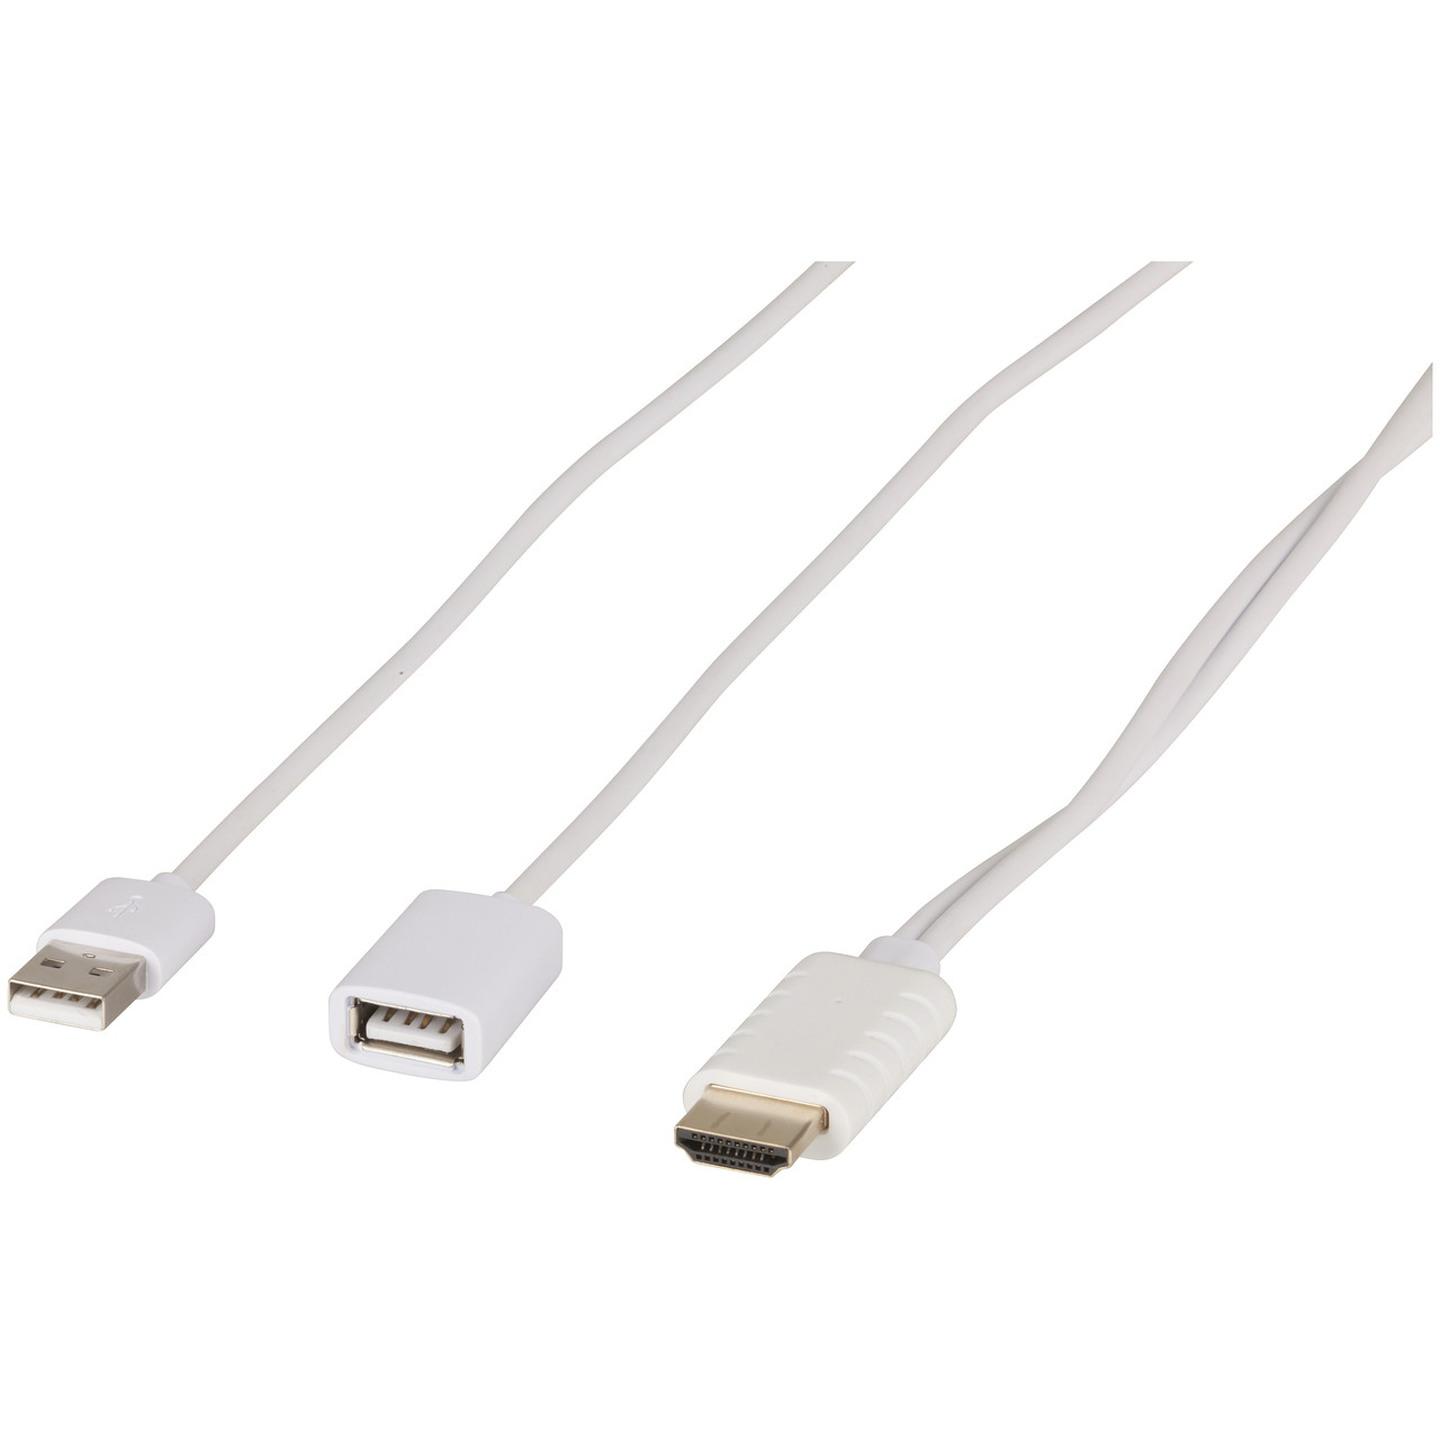 Universal USB to HDMI Smartphone/Tablet Cable